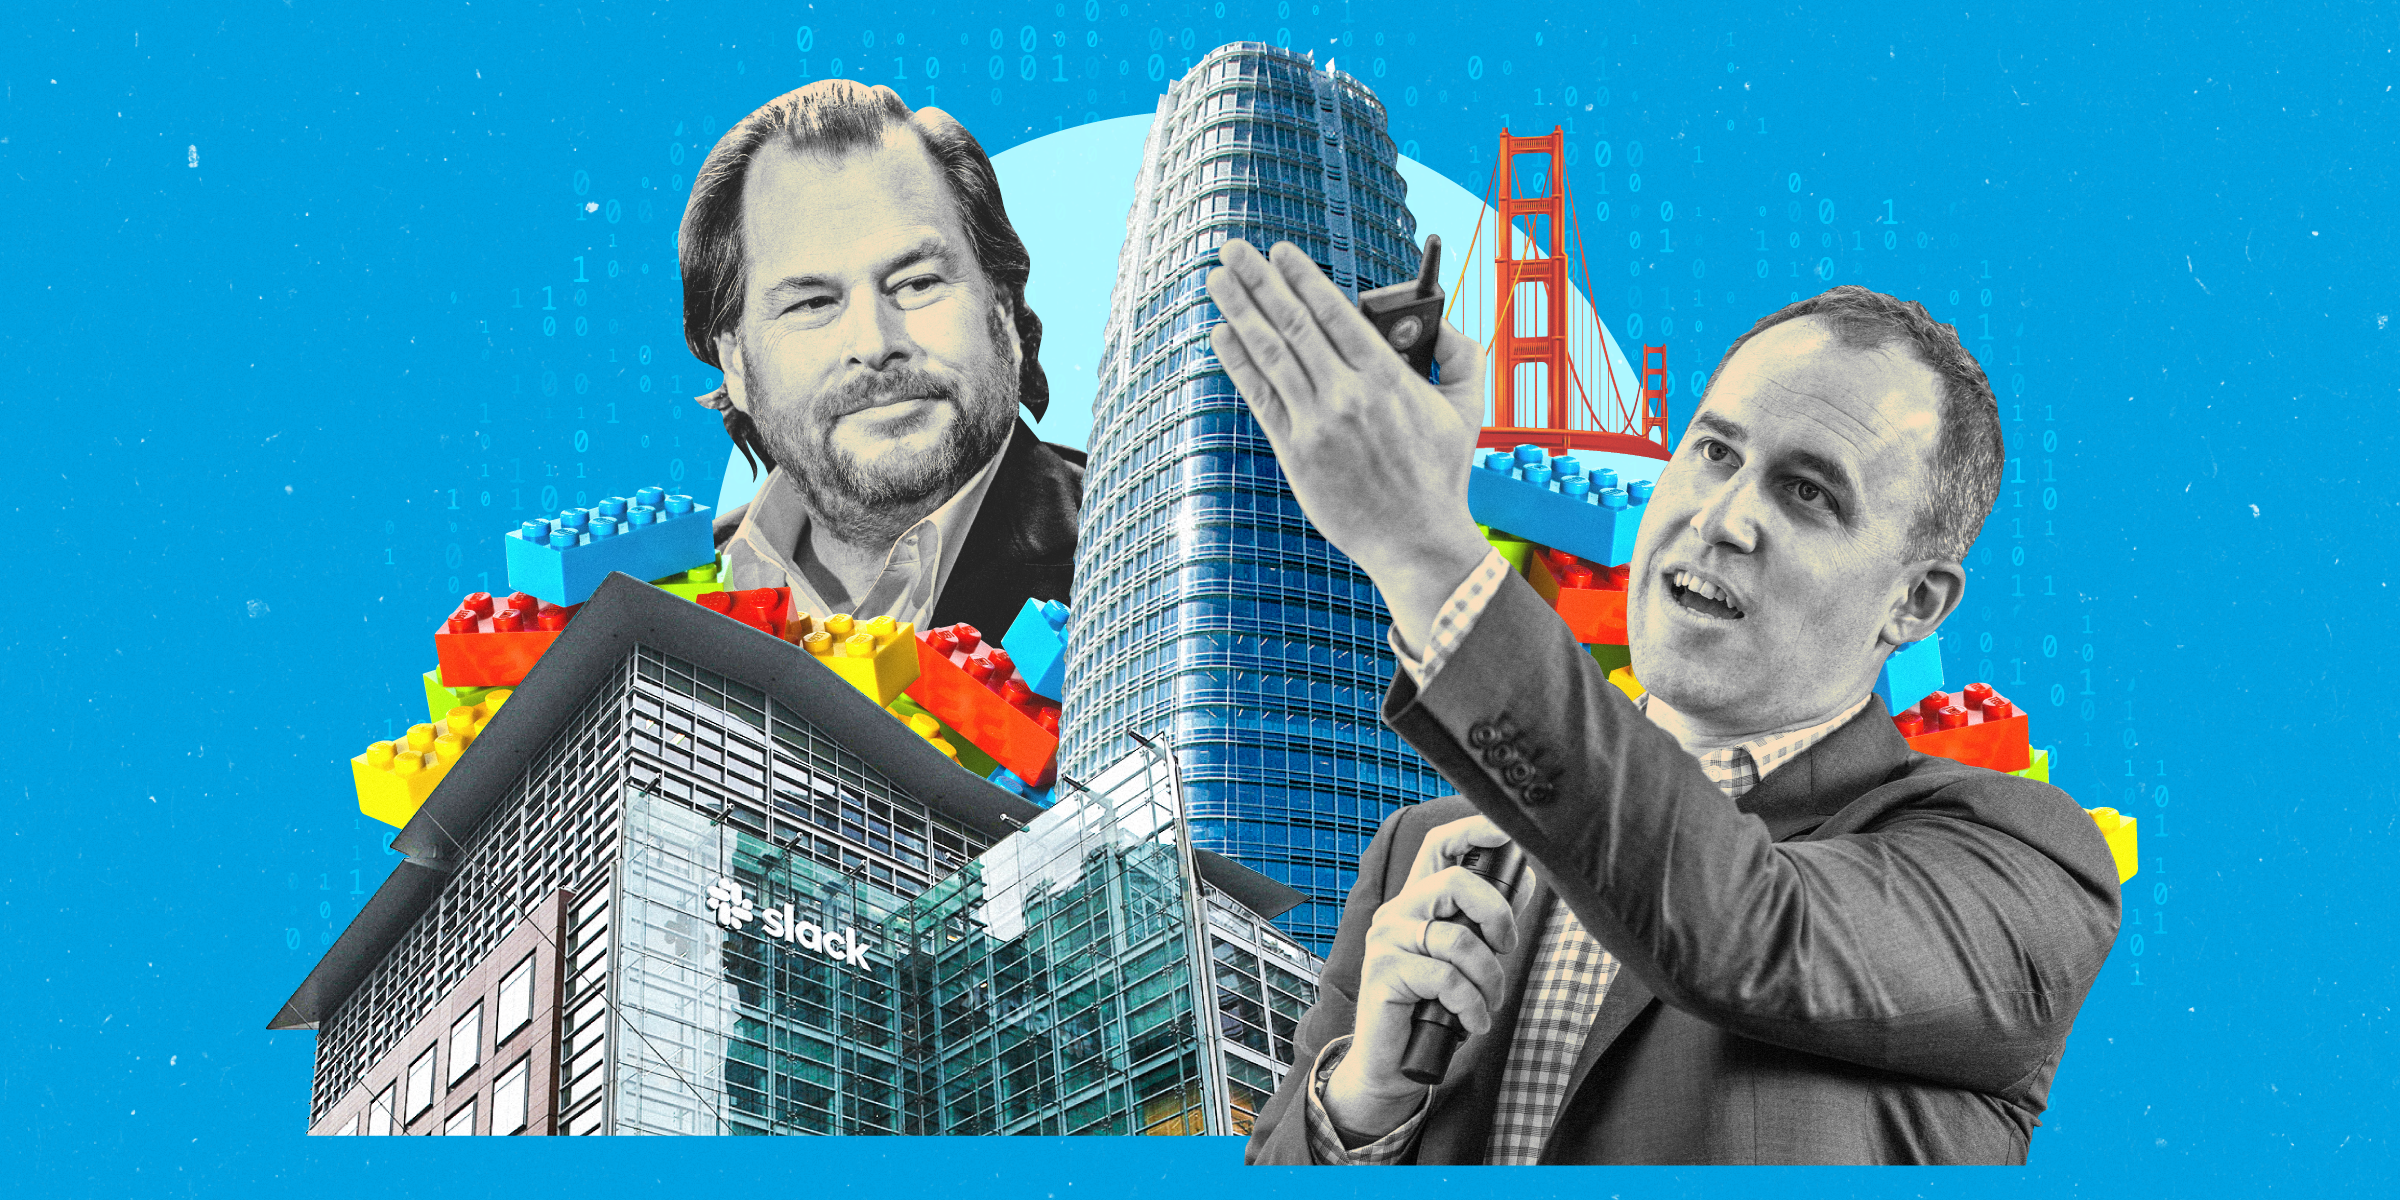 A collage of Marc Benioff, Bret Taylor, Salesforce Tower, Slack headquarters in San Francisco, the Golden Gate Bridge, and lego blocks with binary code patterned out on a blue background.